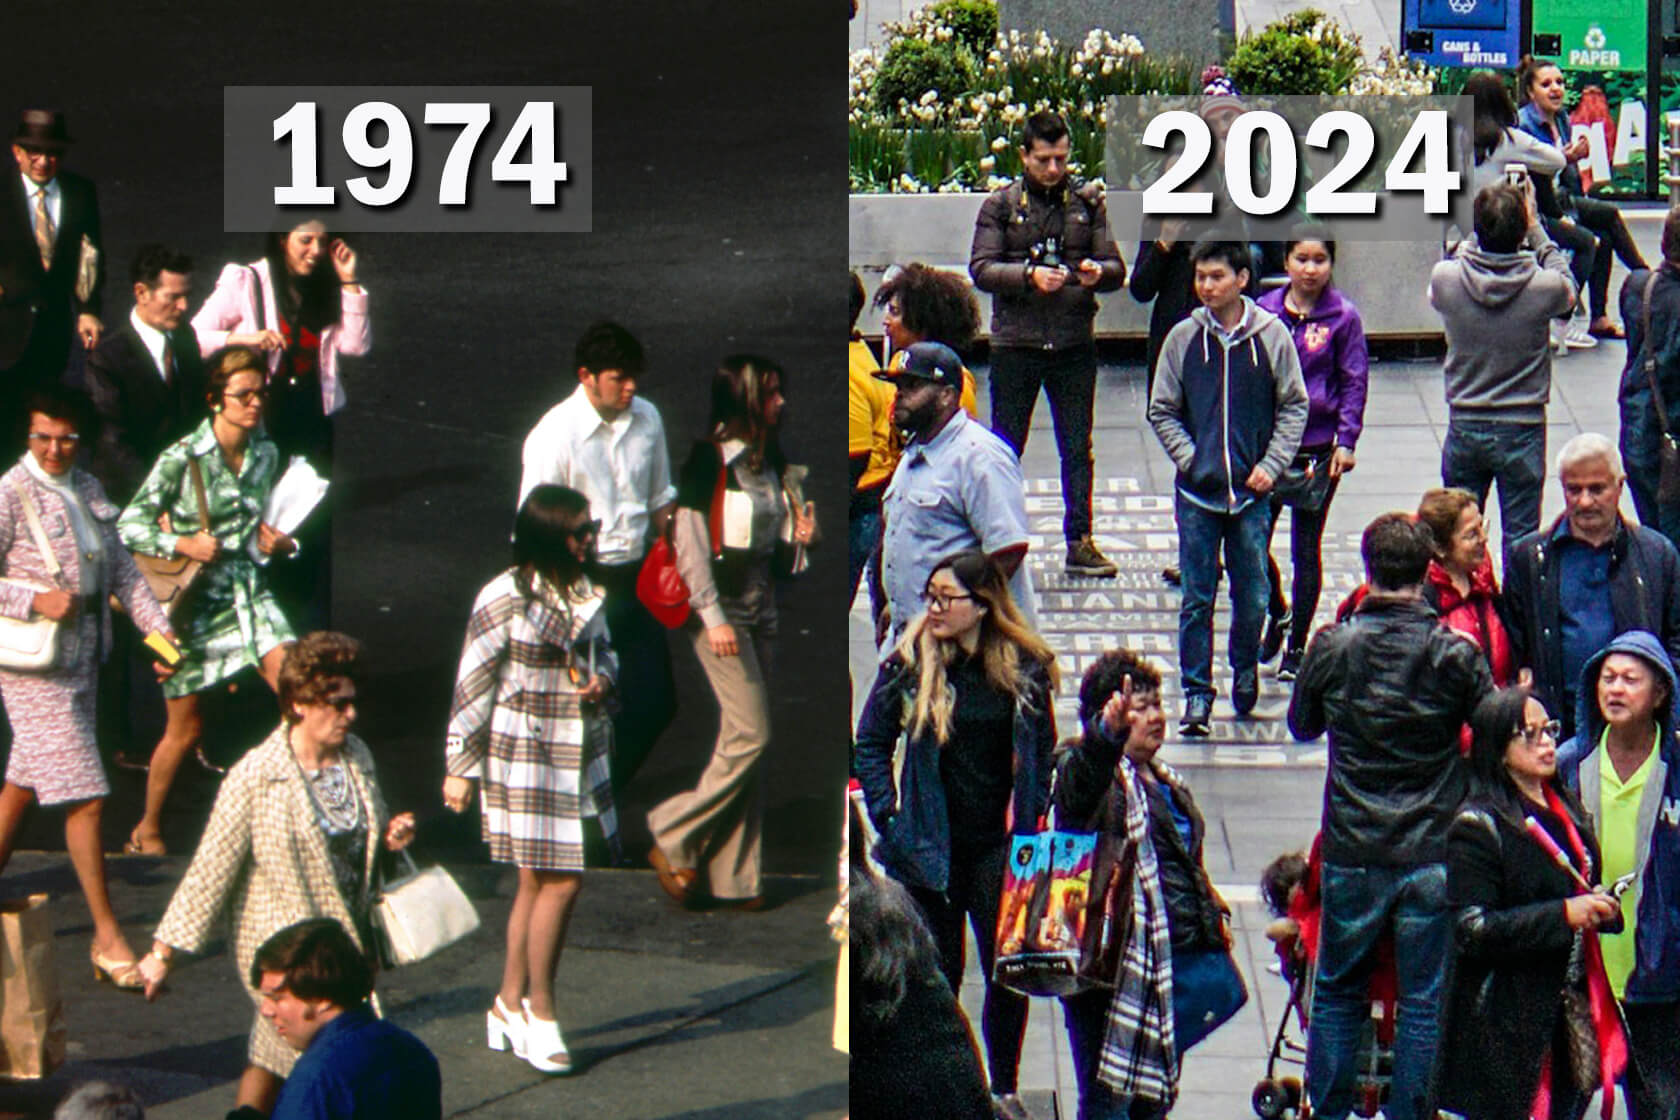 Image of pedestrians from 1974 and an image of pedestrians from 2024.